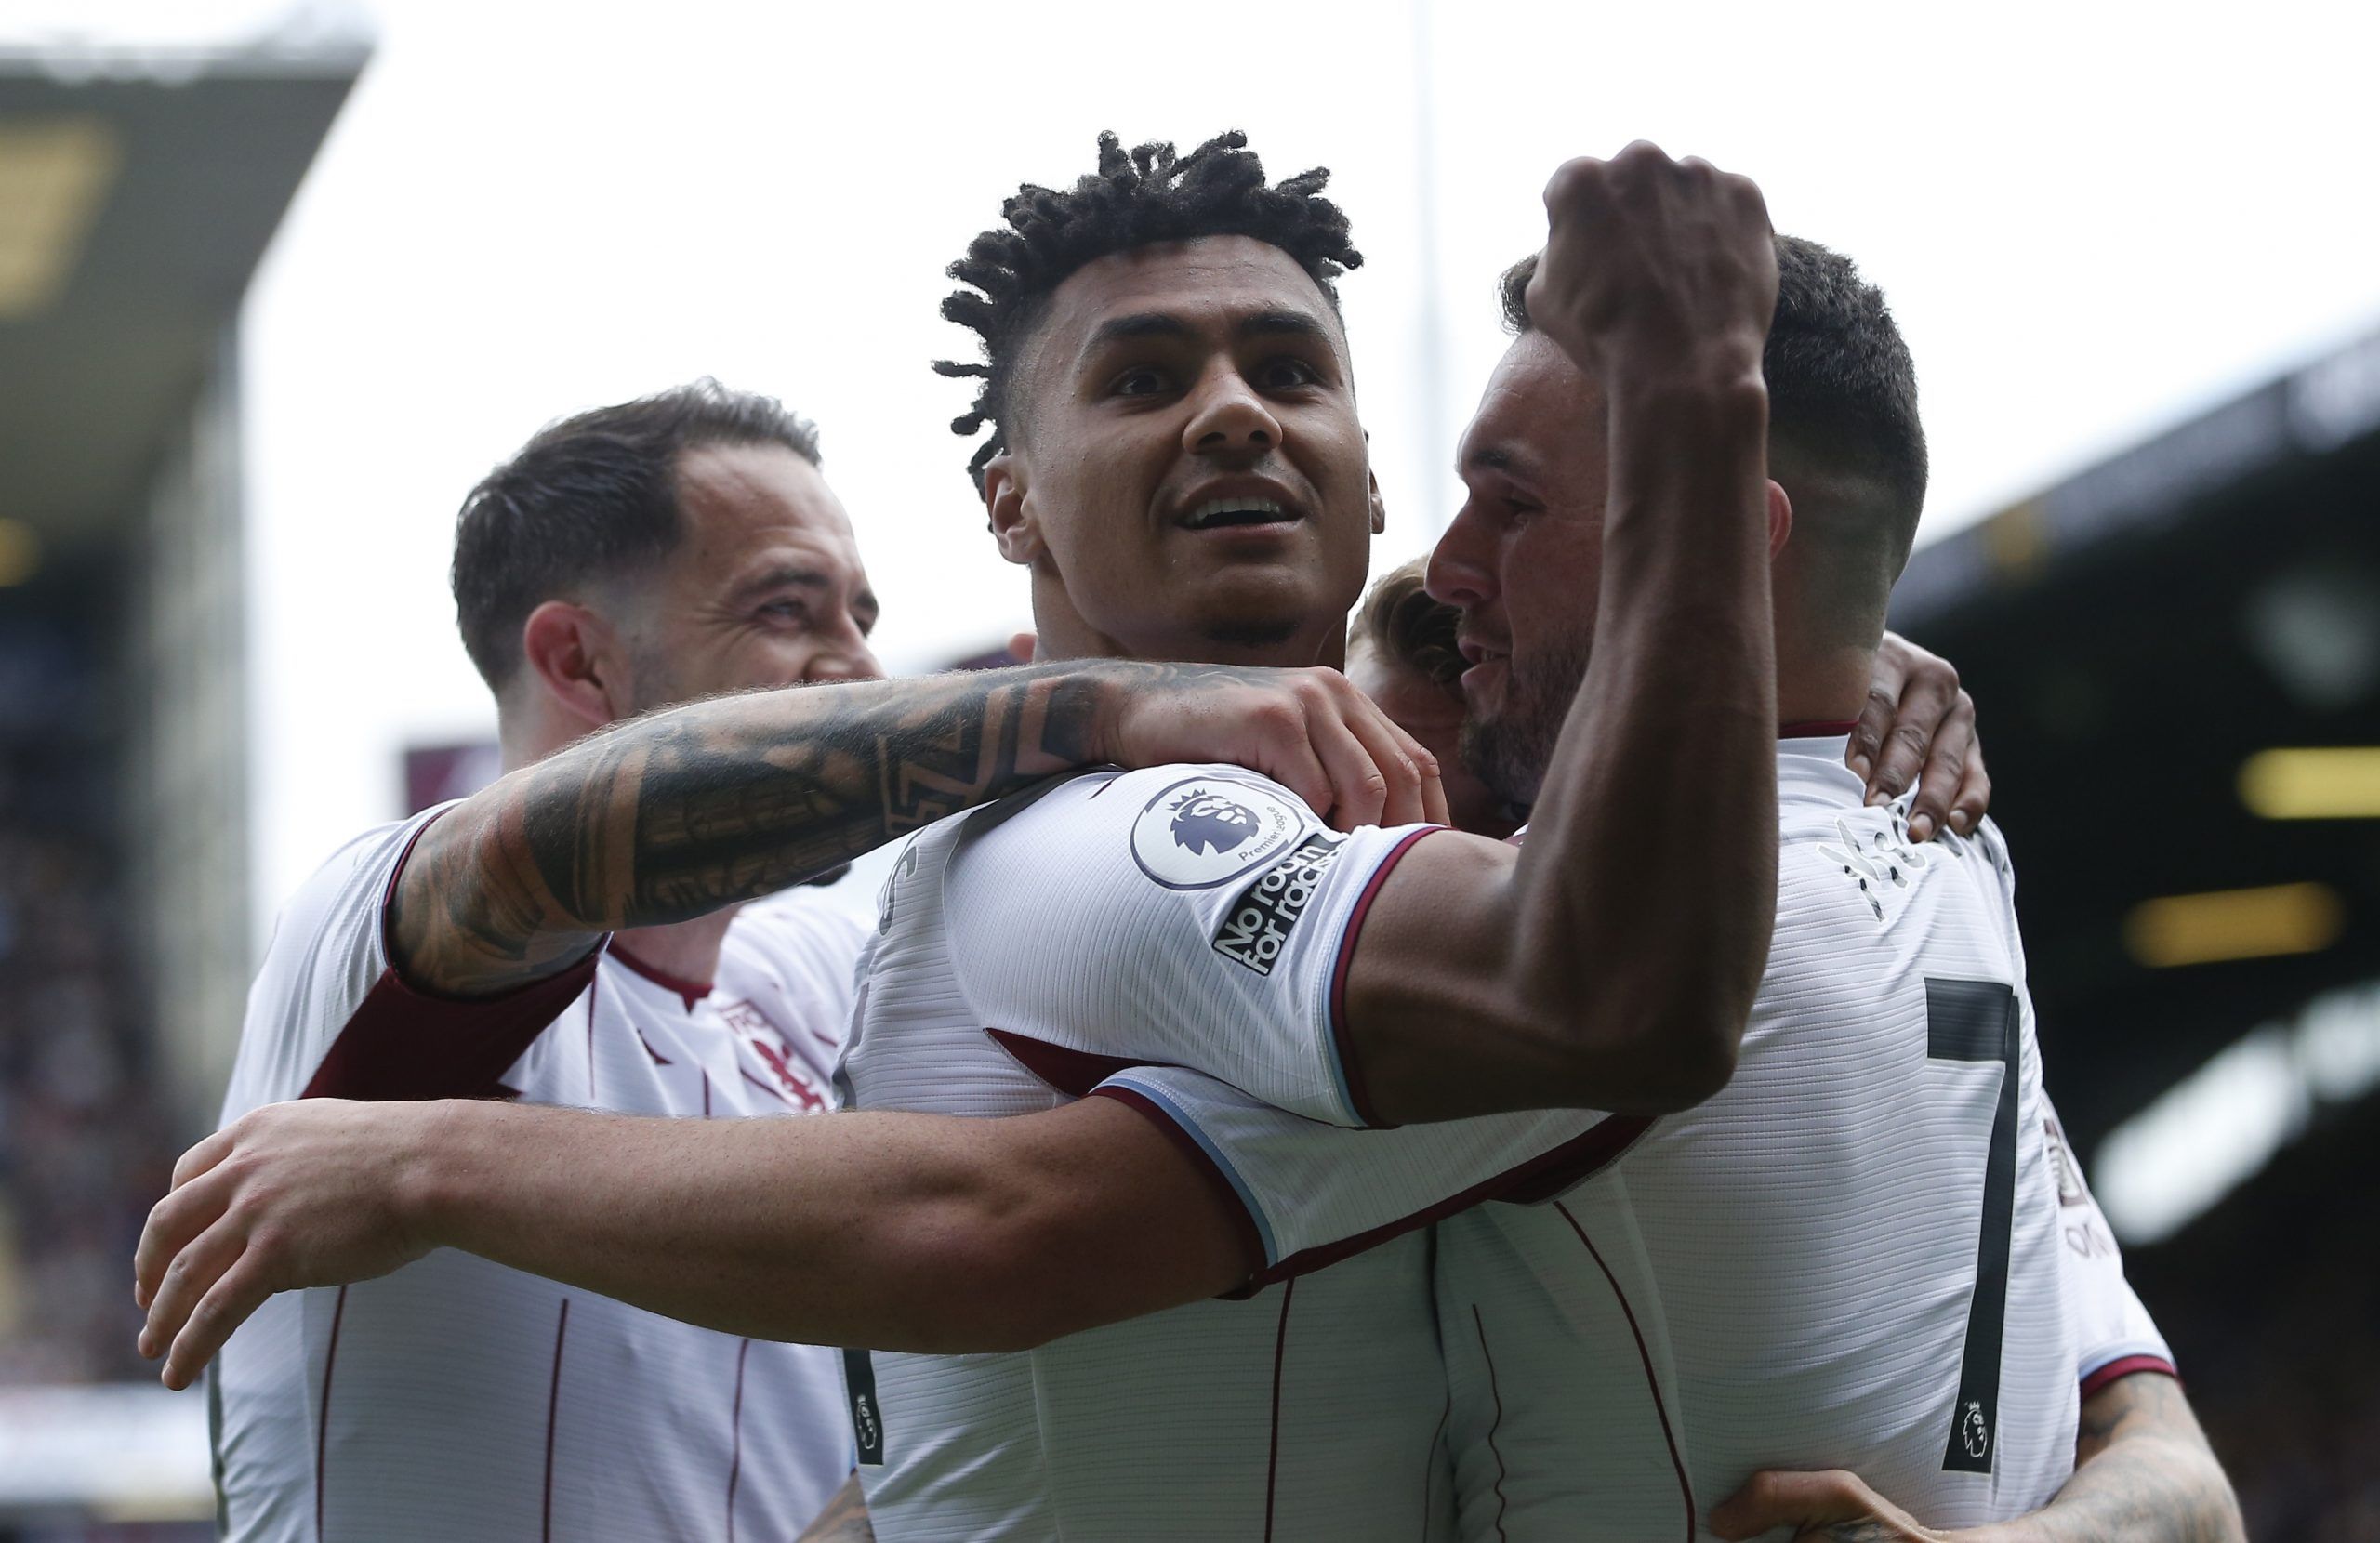 Soccer Football - Premier League - Burnley v Aston Villa - Turf Moor, Burnley, Britain - May 7, 2022 Aston Villa's Ollie Watkins celebrates scoring their third goal with Danny Ings and John McGinn REUTERS/Craig Brough EDITORIAL USE ONLY. No use with unauthorized audio, video, data, fixture lists, club/league logos or 'live' services. Online in-match use limited to 75 images, no video emulation. No use in betting, games or single club /league/player publications.  Please contact your account repr